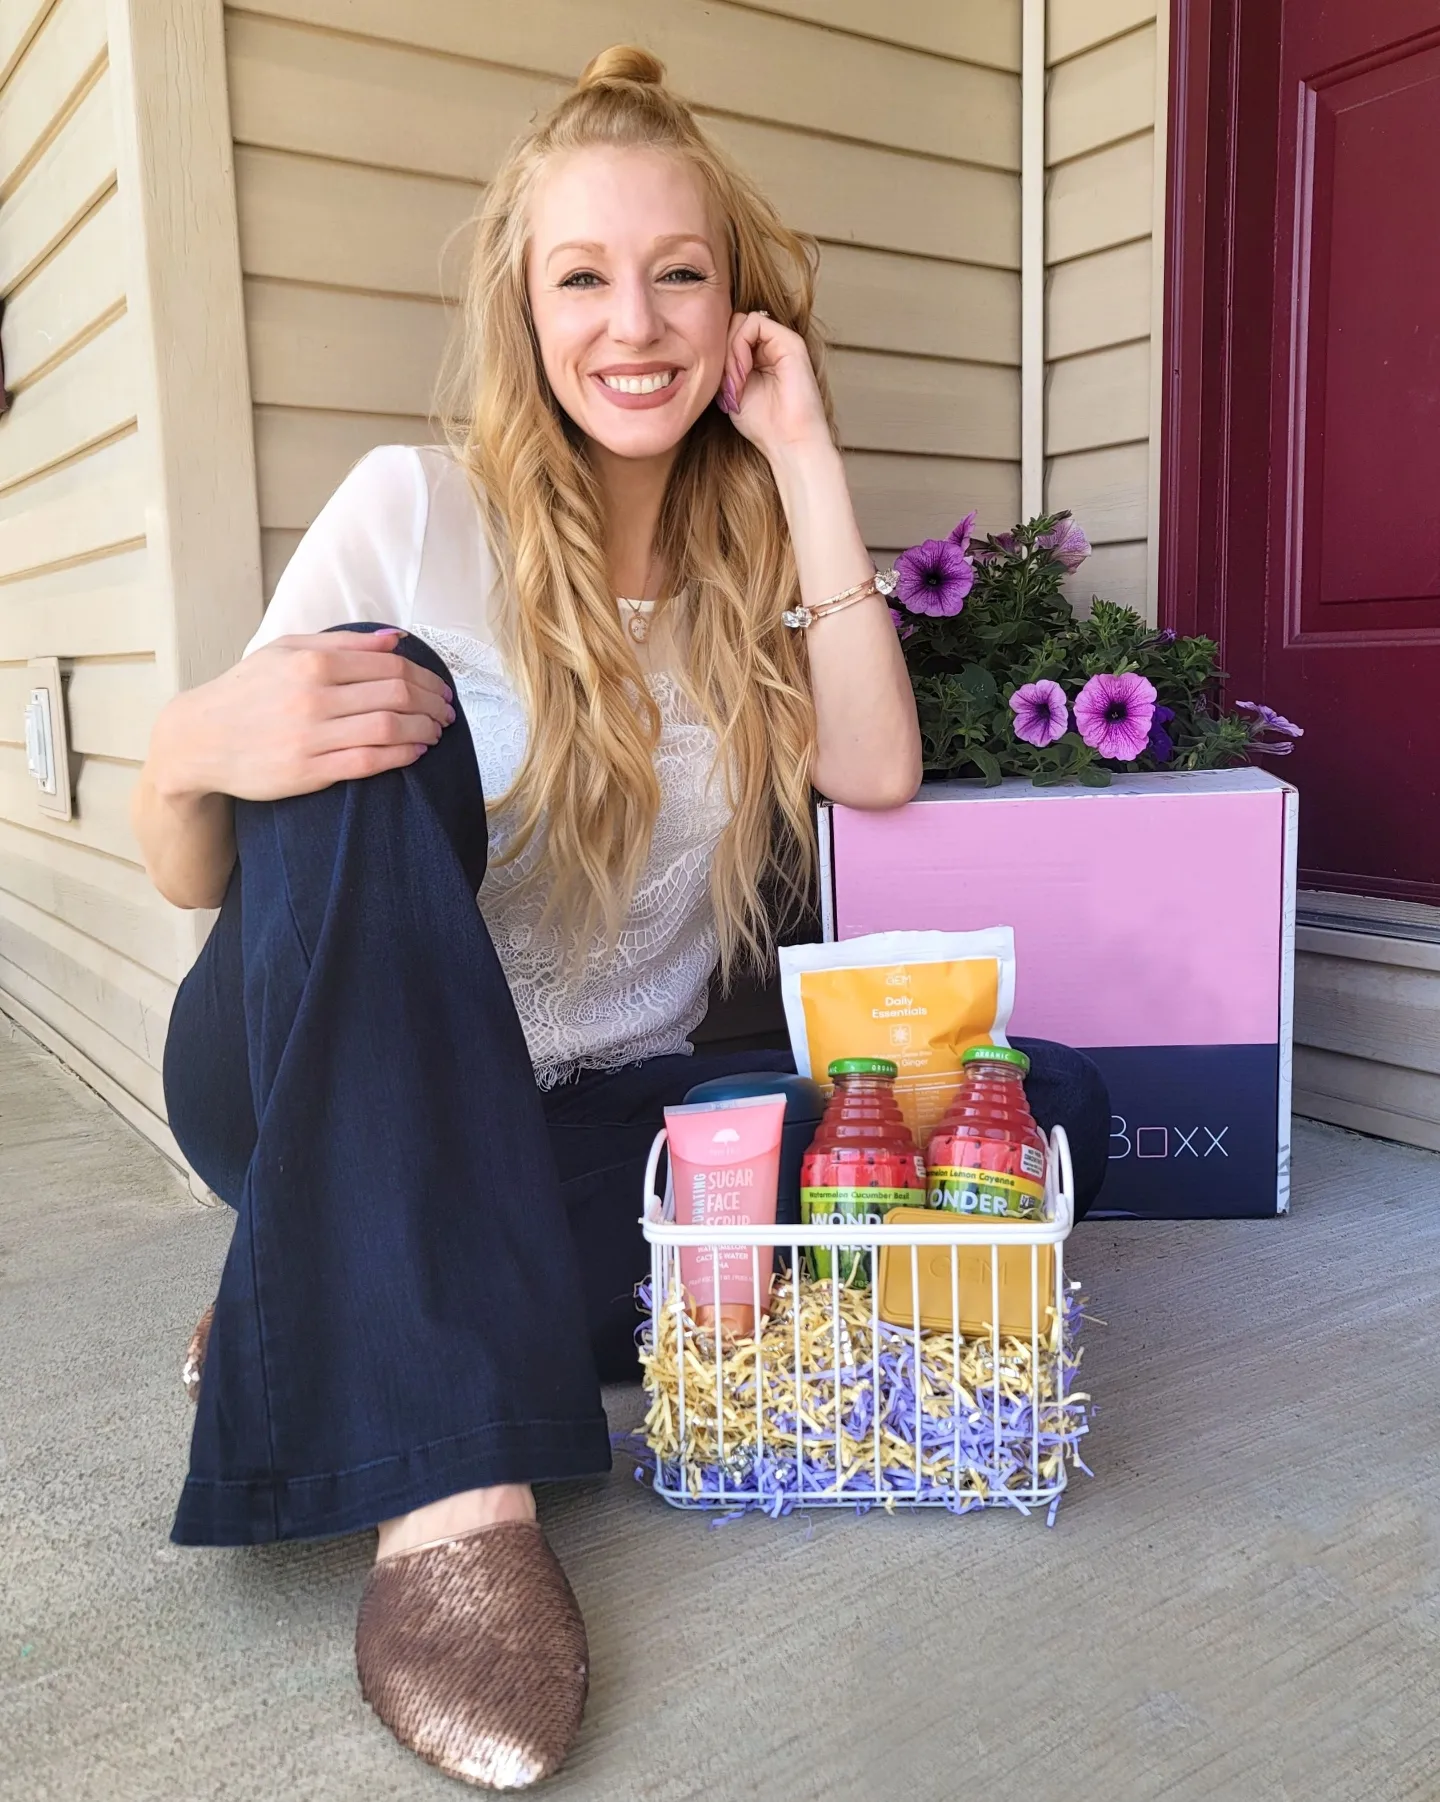 Blonde girl sitting next to basket of products.